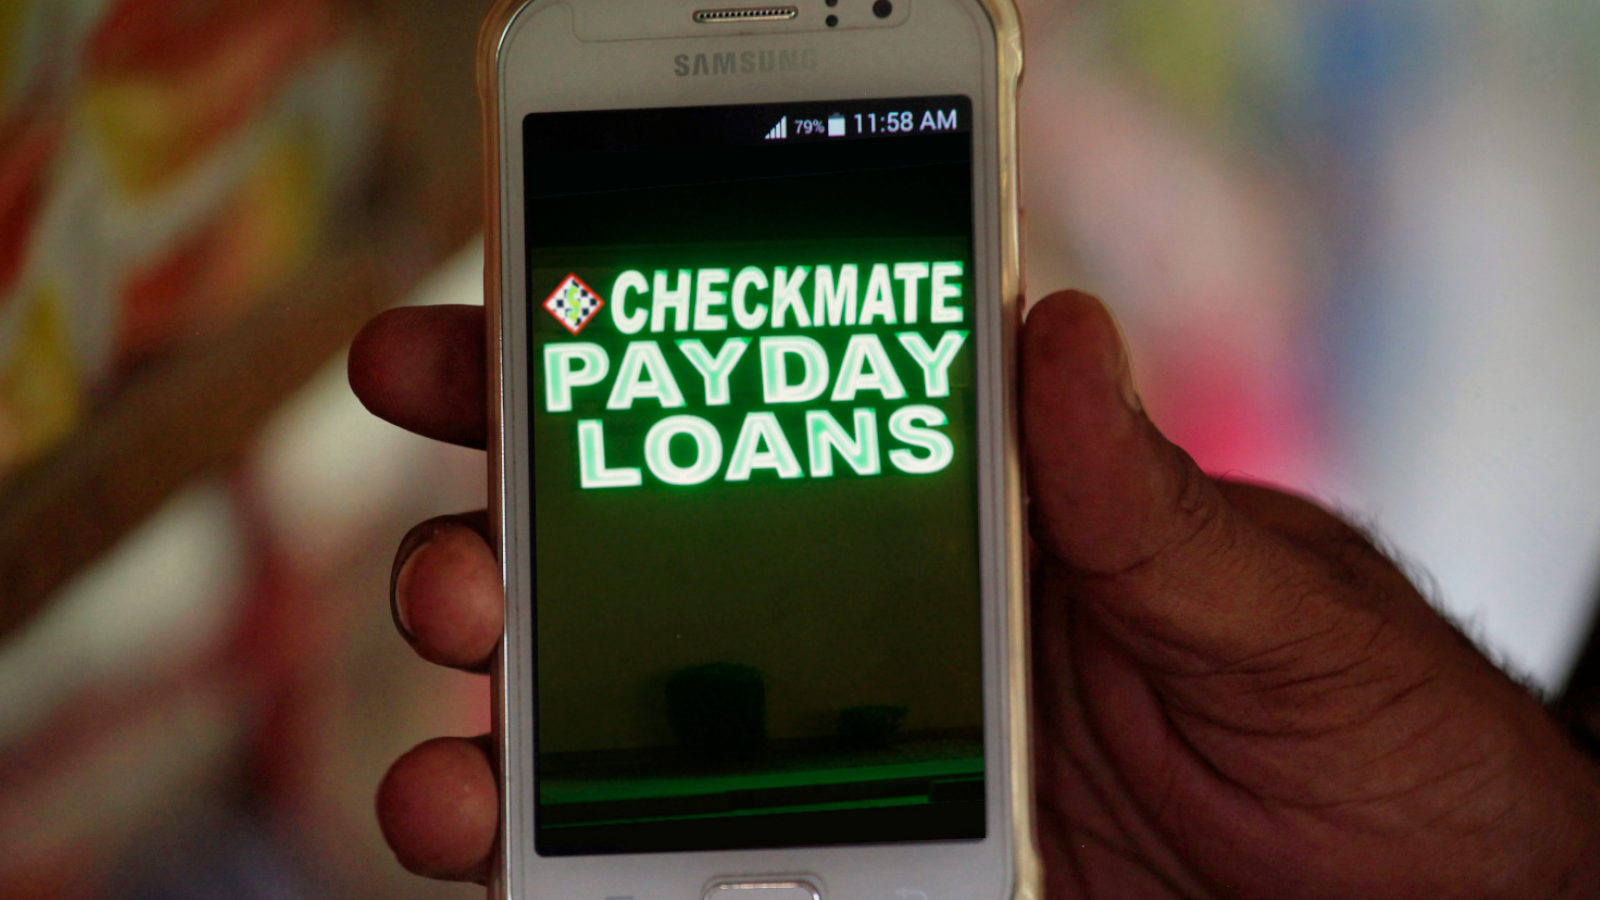 A composite image showing a hand holding a smartphone with a neon payday loan business sign superimposed on the screen.